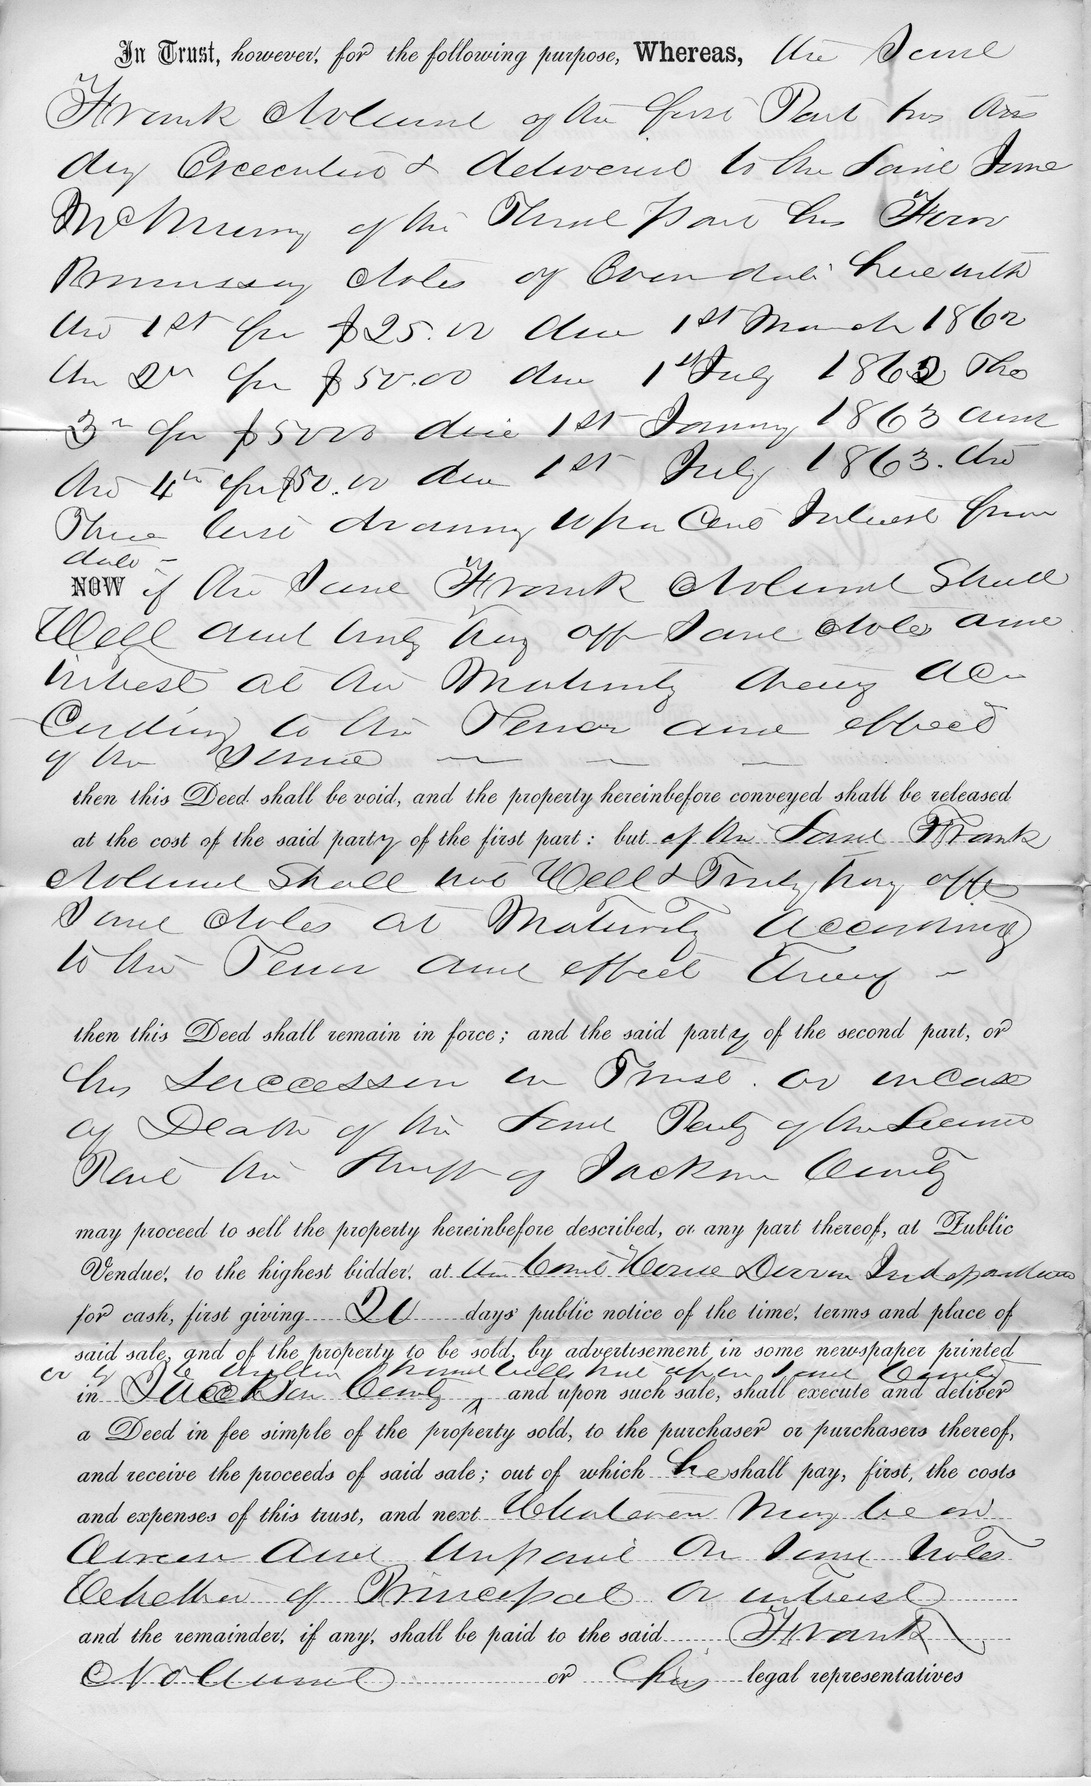 Deed of Trust from Frank Noland to Jane McMurry